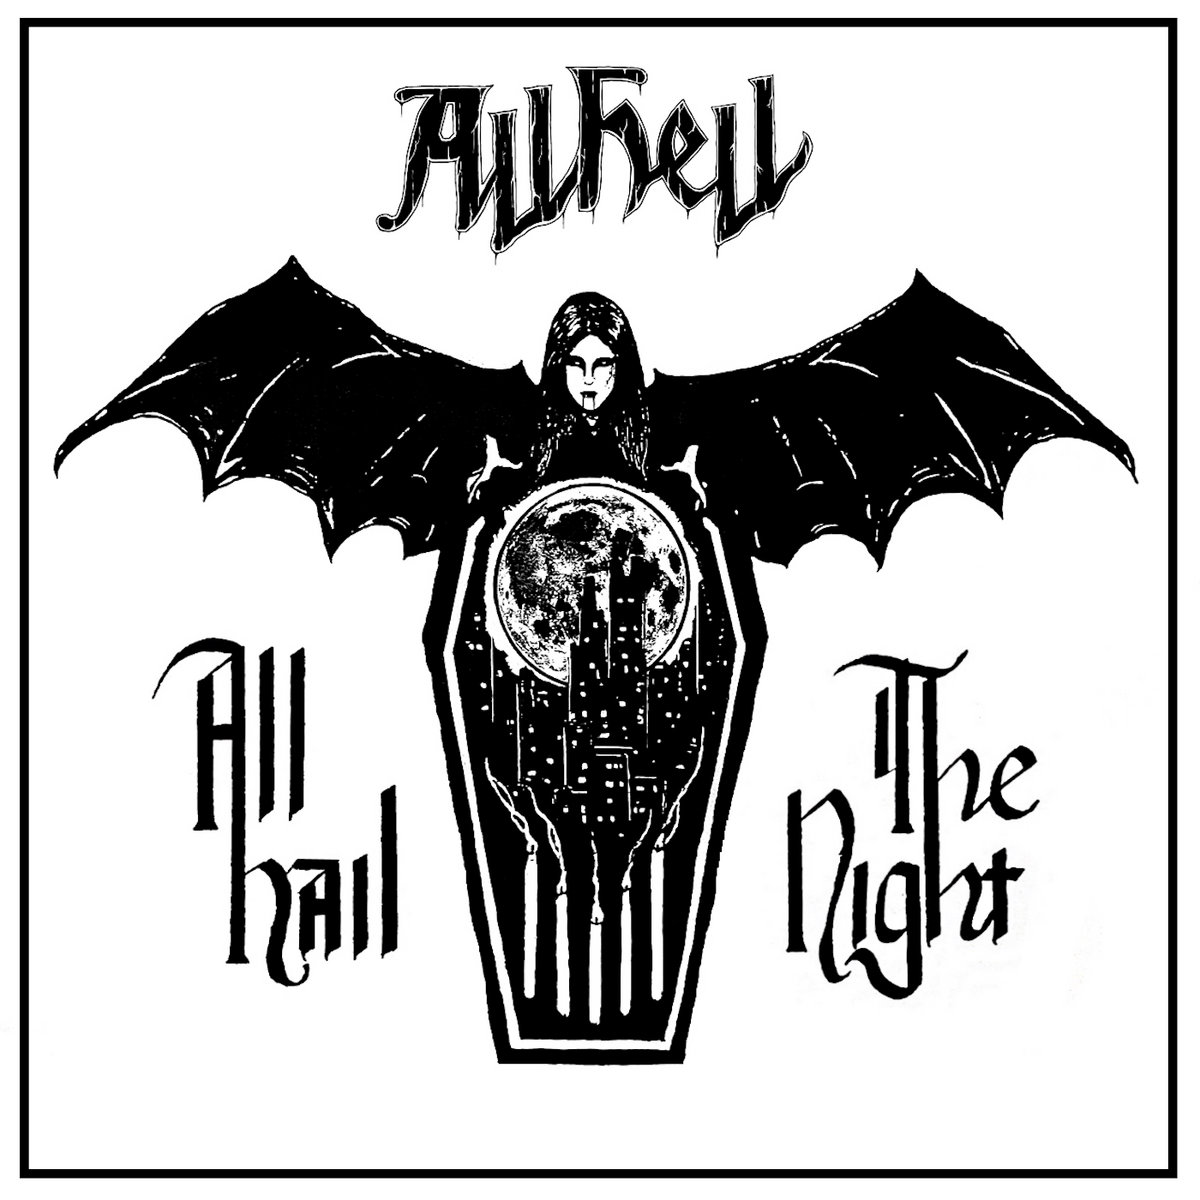 All Hell - "All Hail The Night" EP - 2023